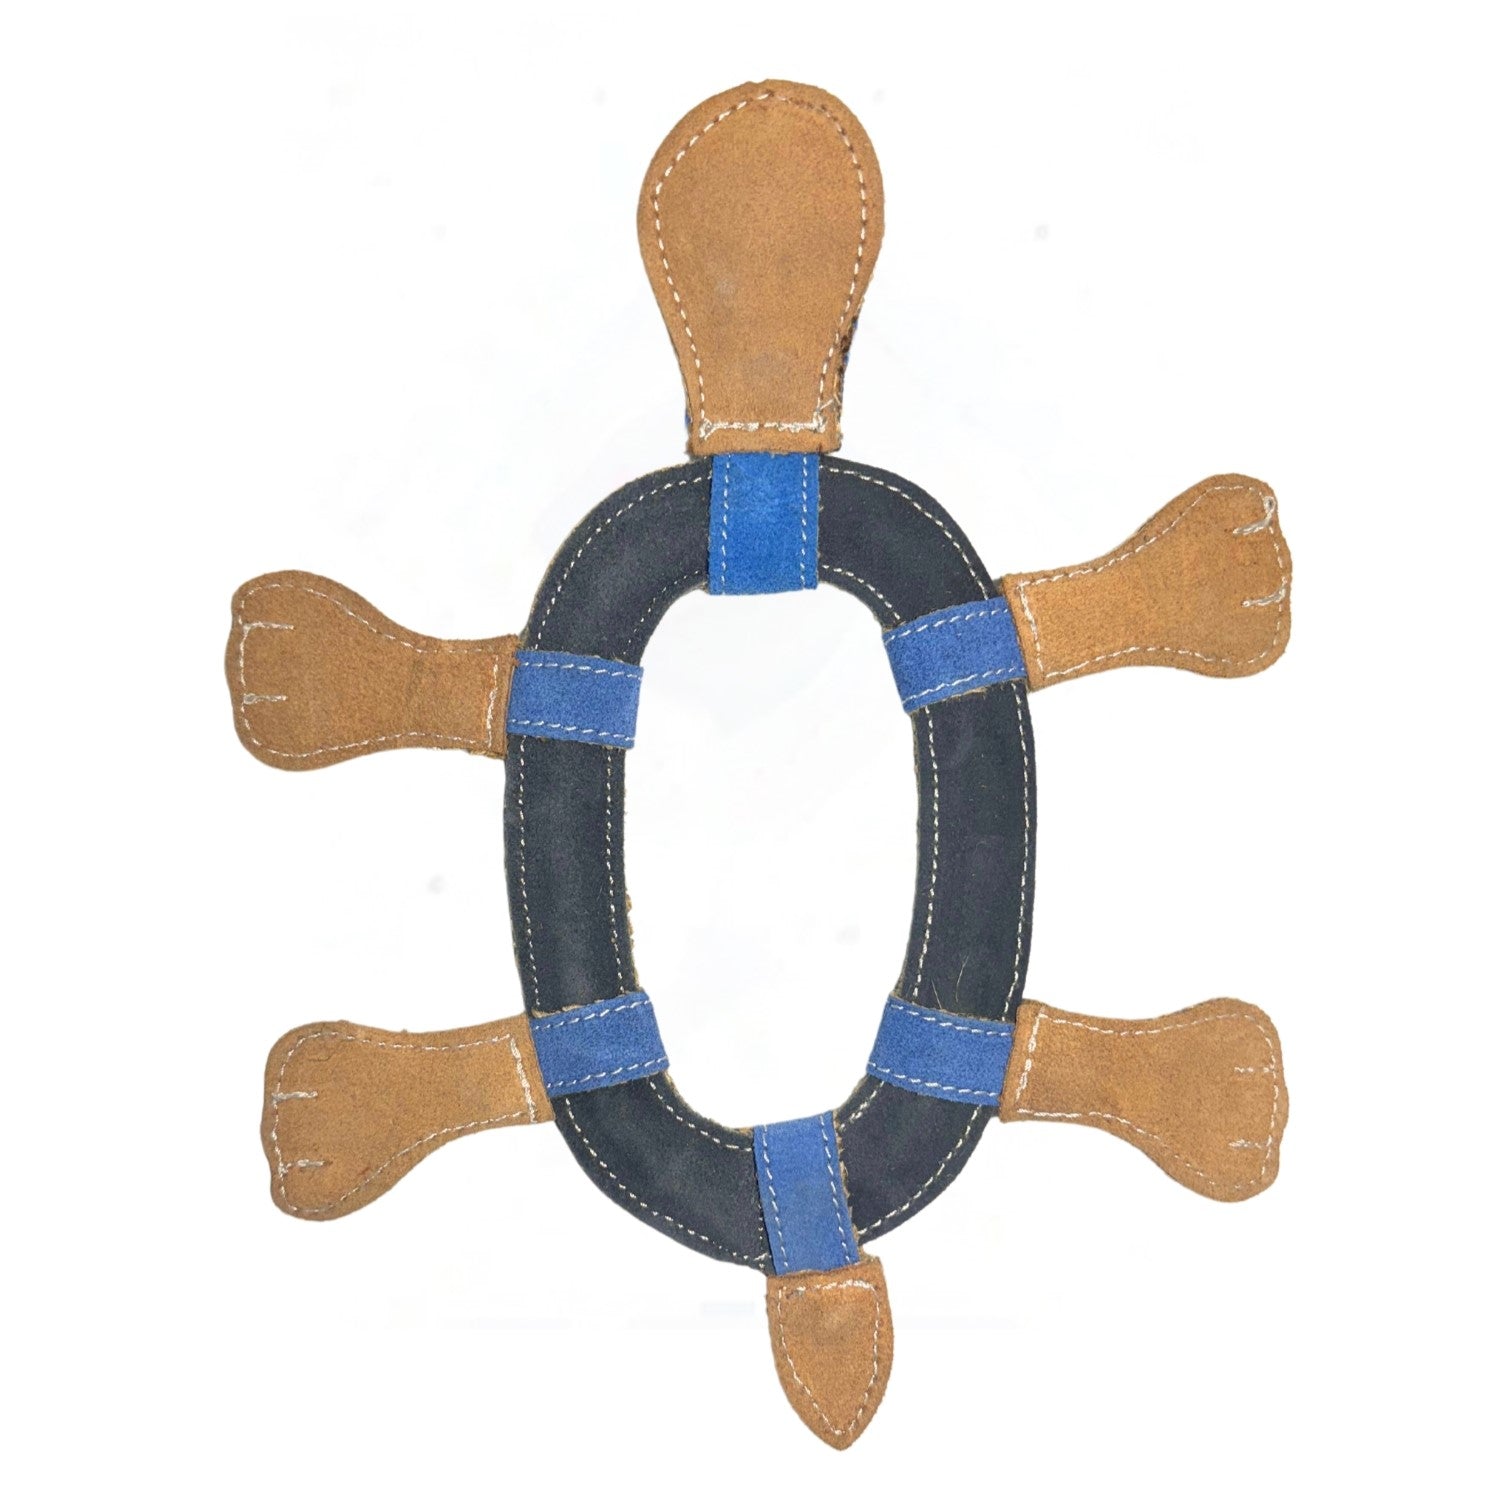 A decorative Thomas the Turtle - blue & navy lifebuoy made of blue and brown buffalo suede, crafted to resemble a nautical flotation device, isolated on a white background. Brand: Georgie Paws